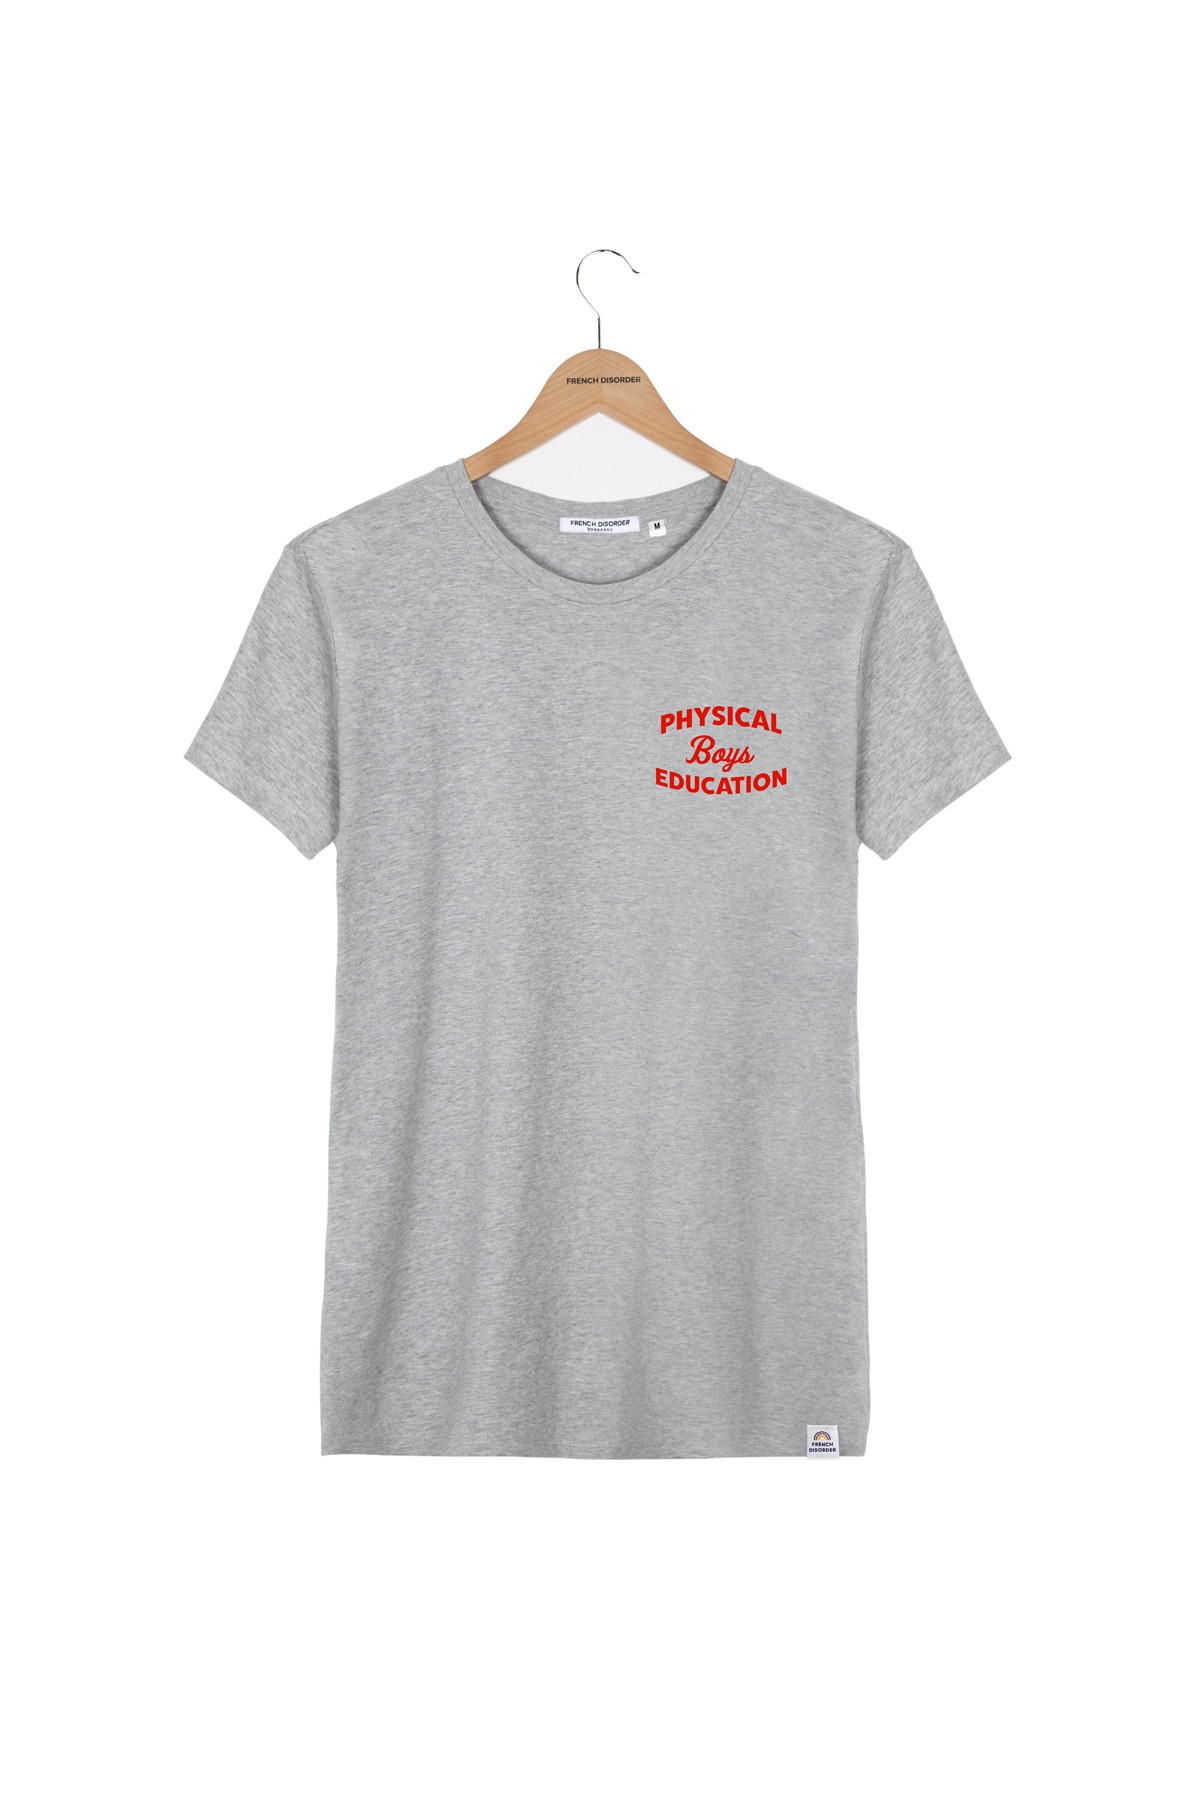 Tshirt PHYSICAL EDUCATION French Disorder